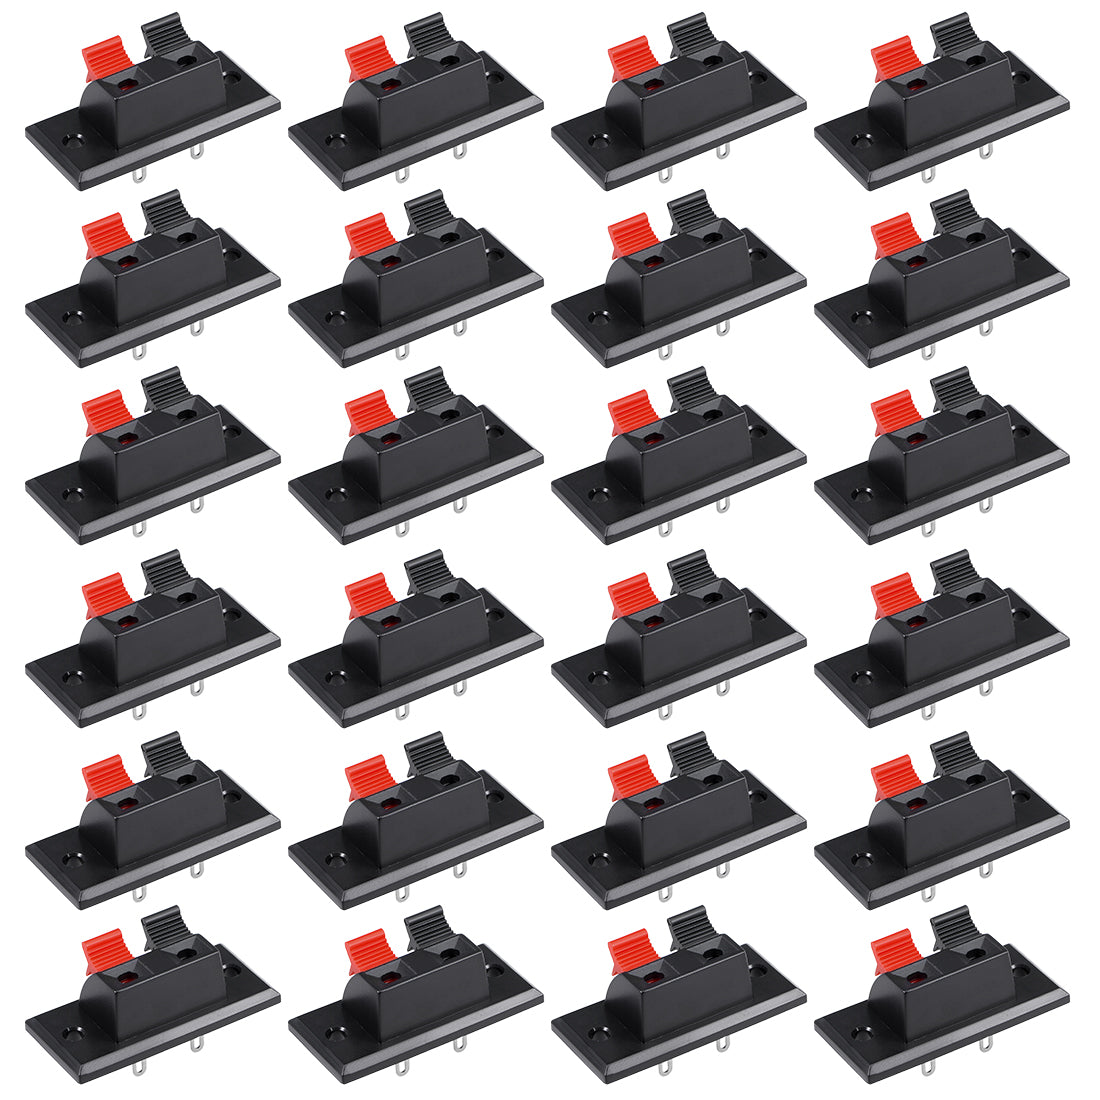 uxcell Uxcell 24pcs 2 Way Jack Socket Spring Push Release Connector Speaker Terminal Strip Block 45mm x 21mm